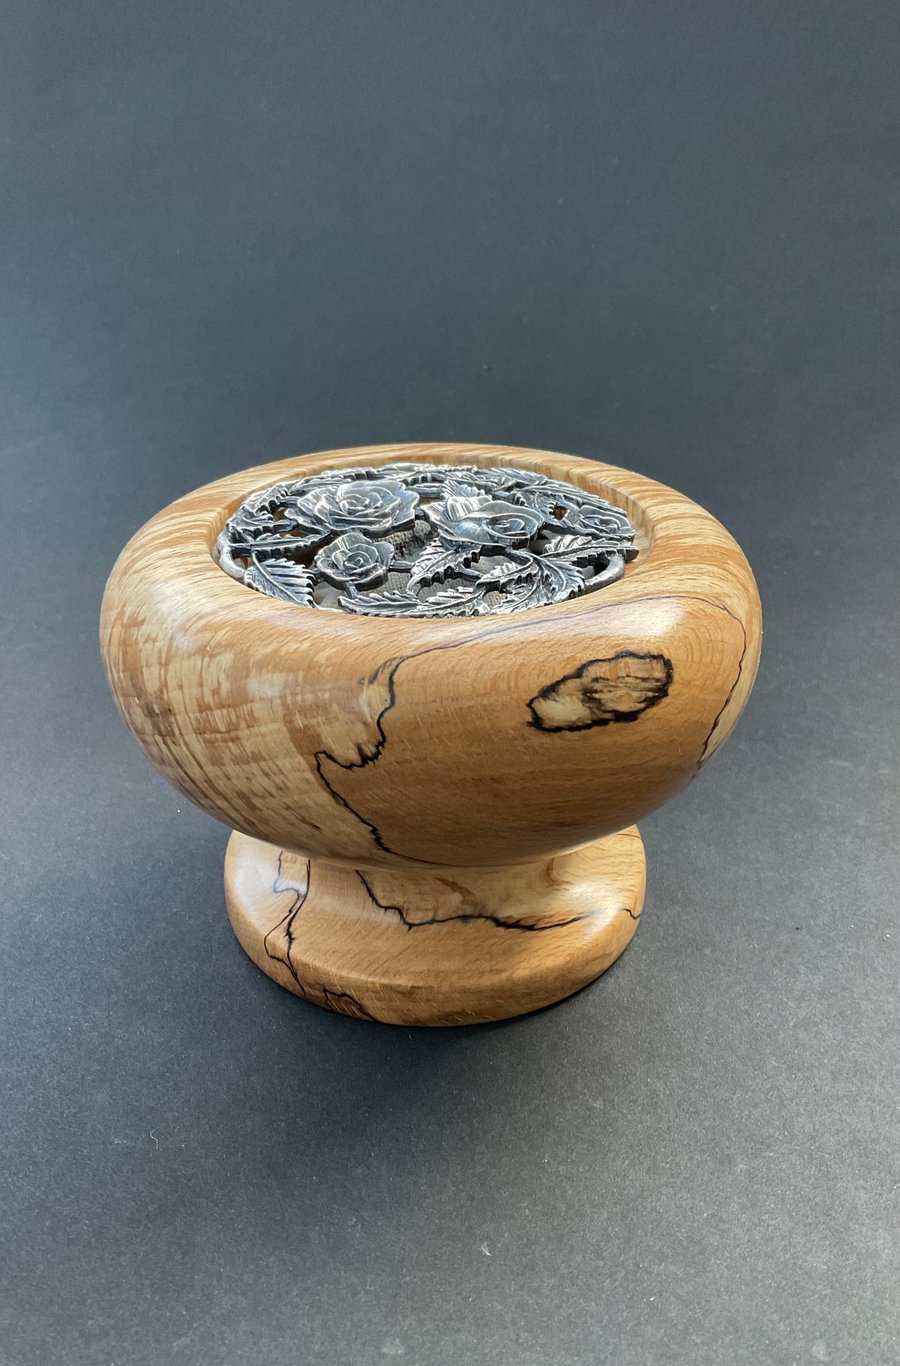 Spalted beech hardwood pot pourri with pewter lid and bag of dried lavender